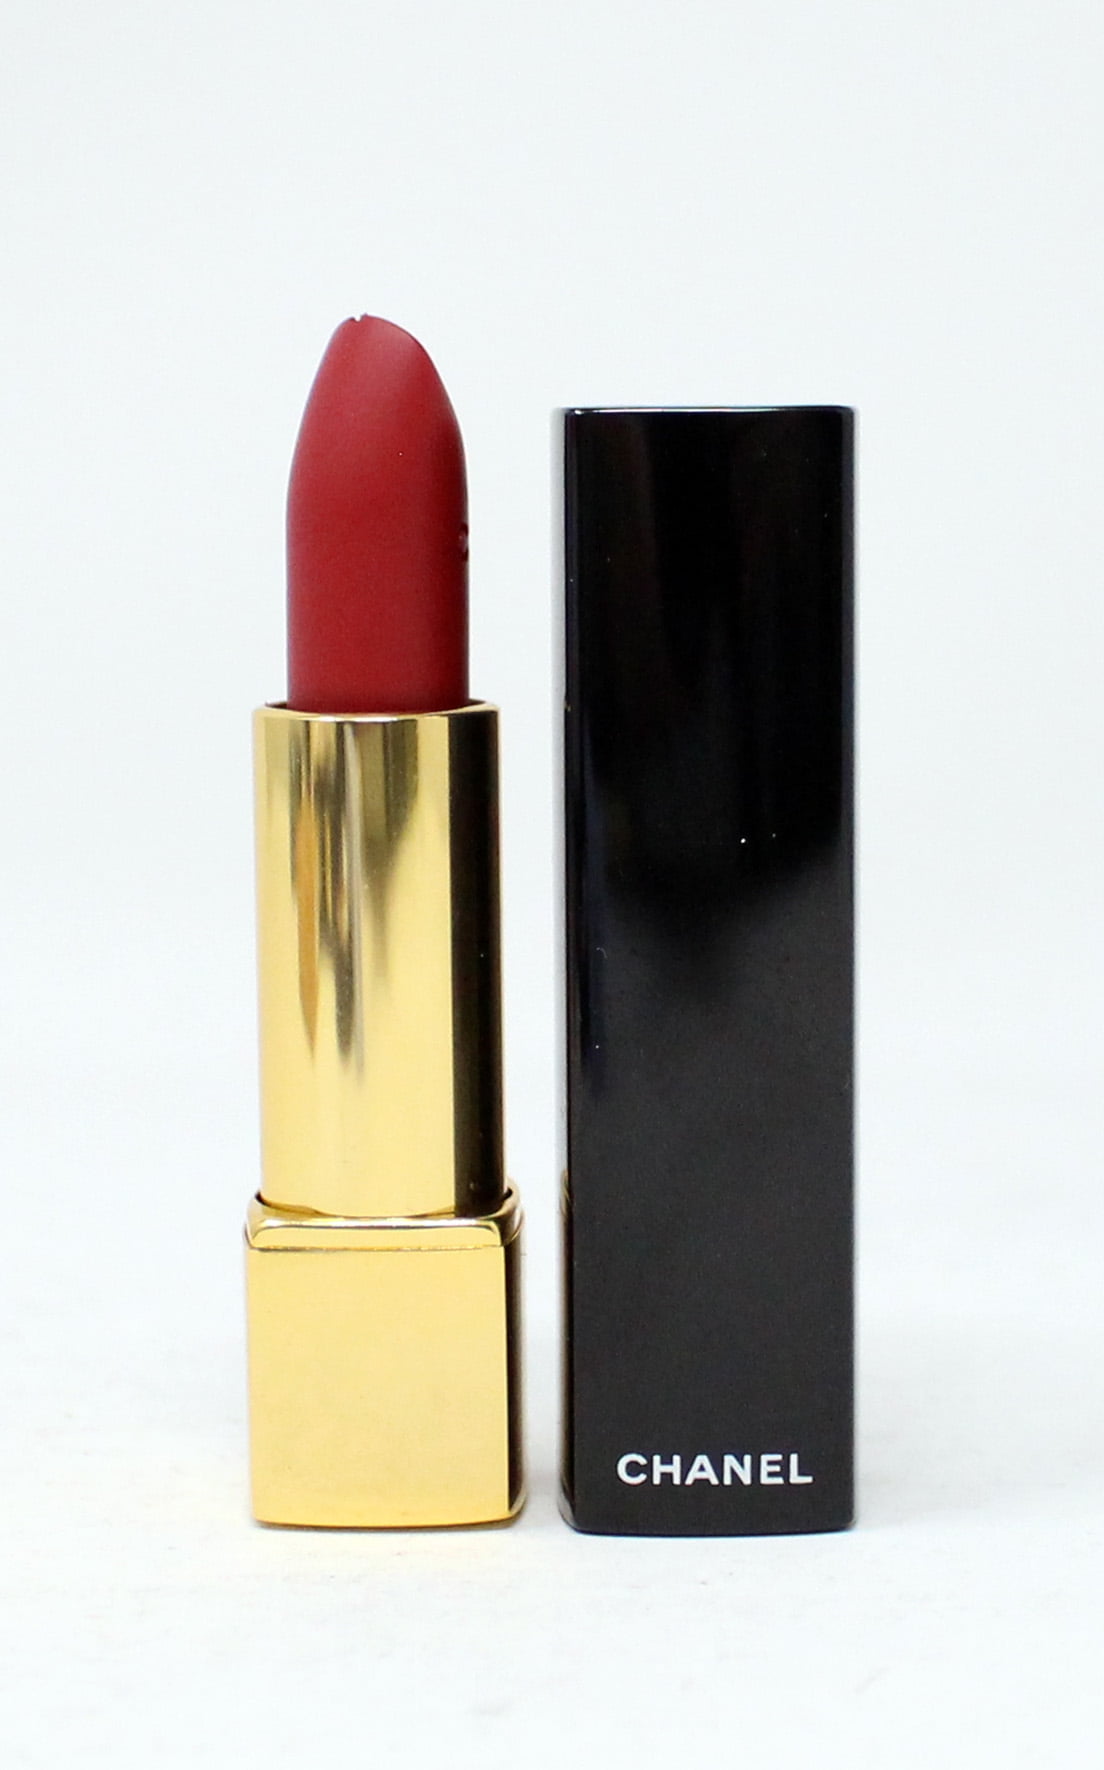 Chanel lipsticks - Rouge Coco, Rouge Allure, etc., Page 117